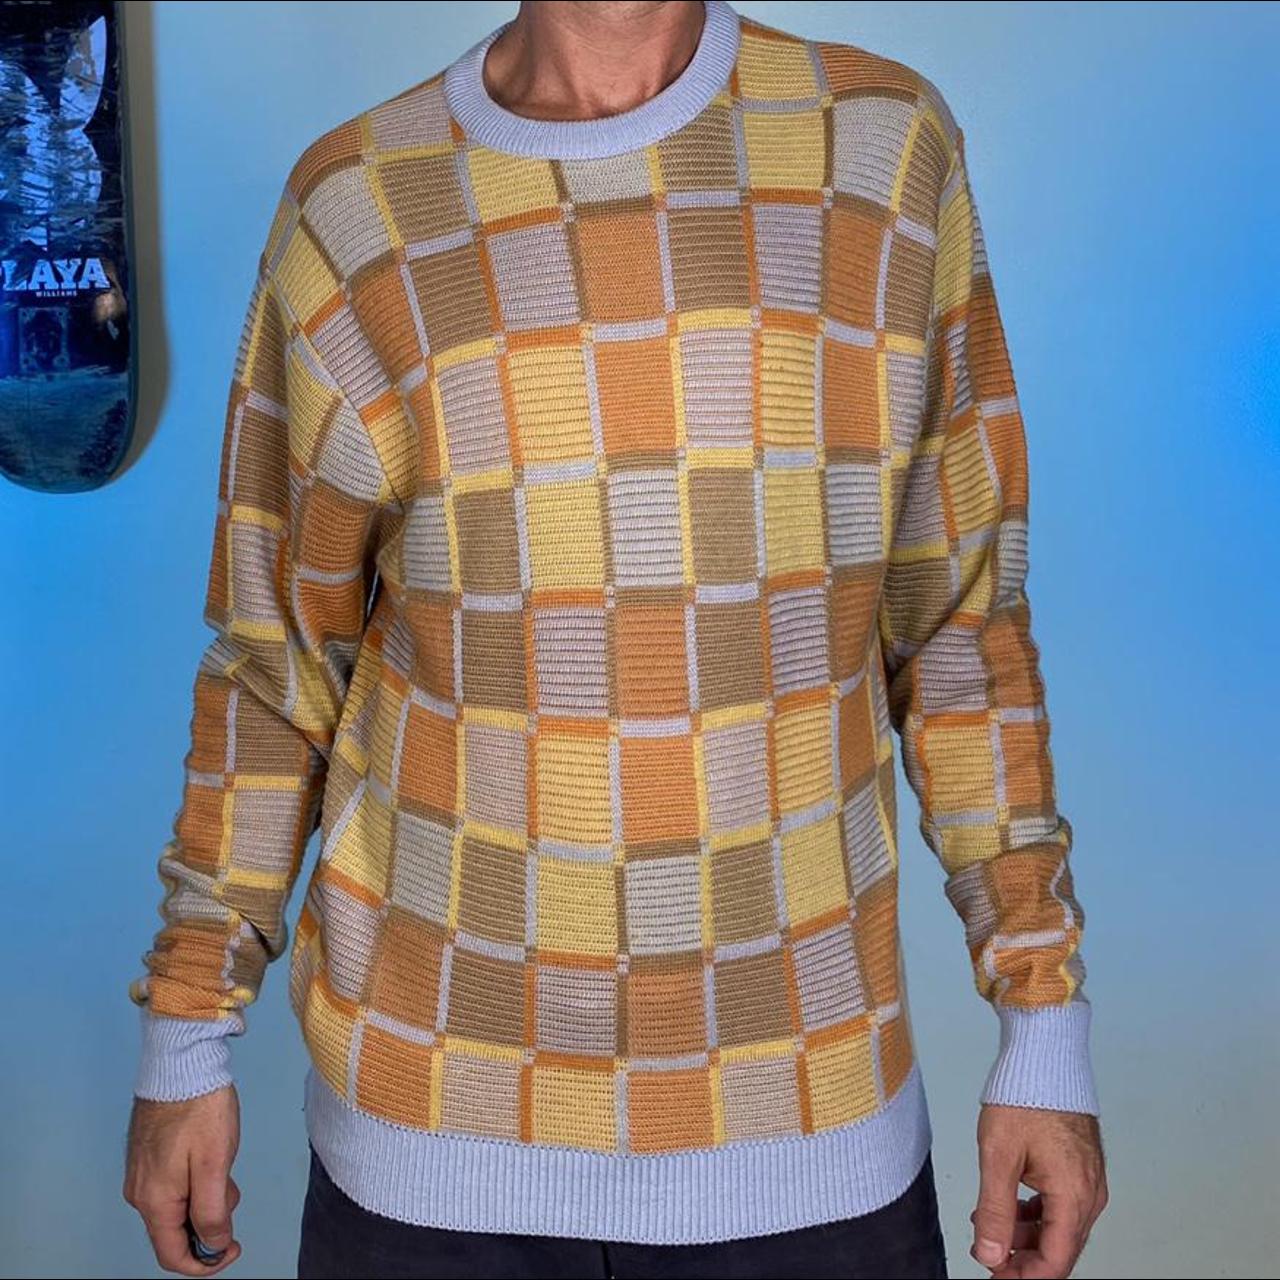 Product Image 2 - Funky sweater men’s size large.